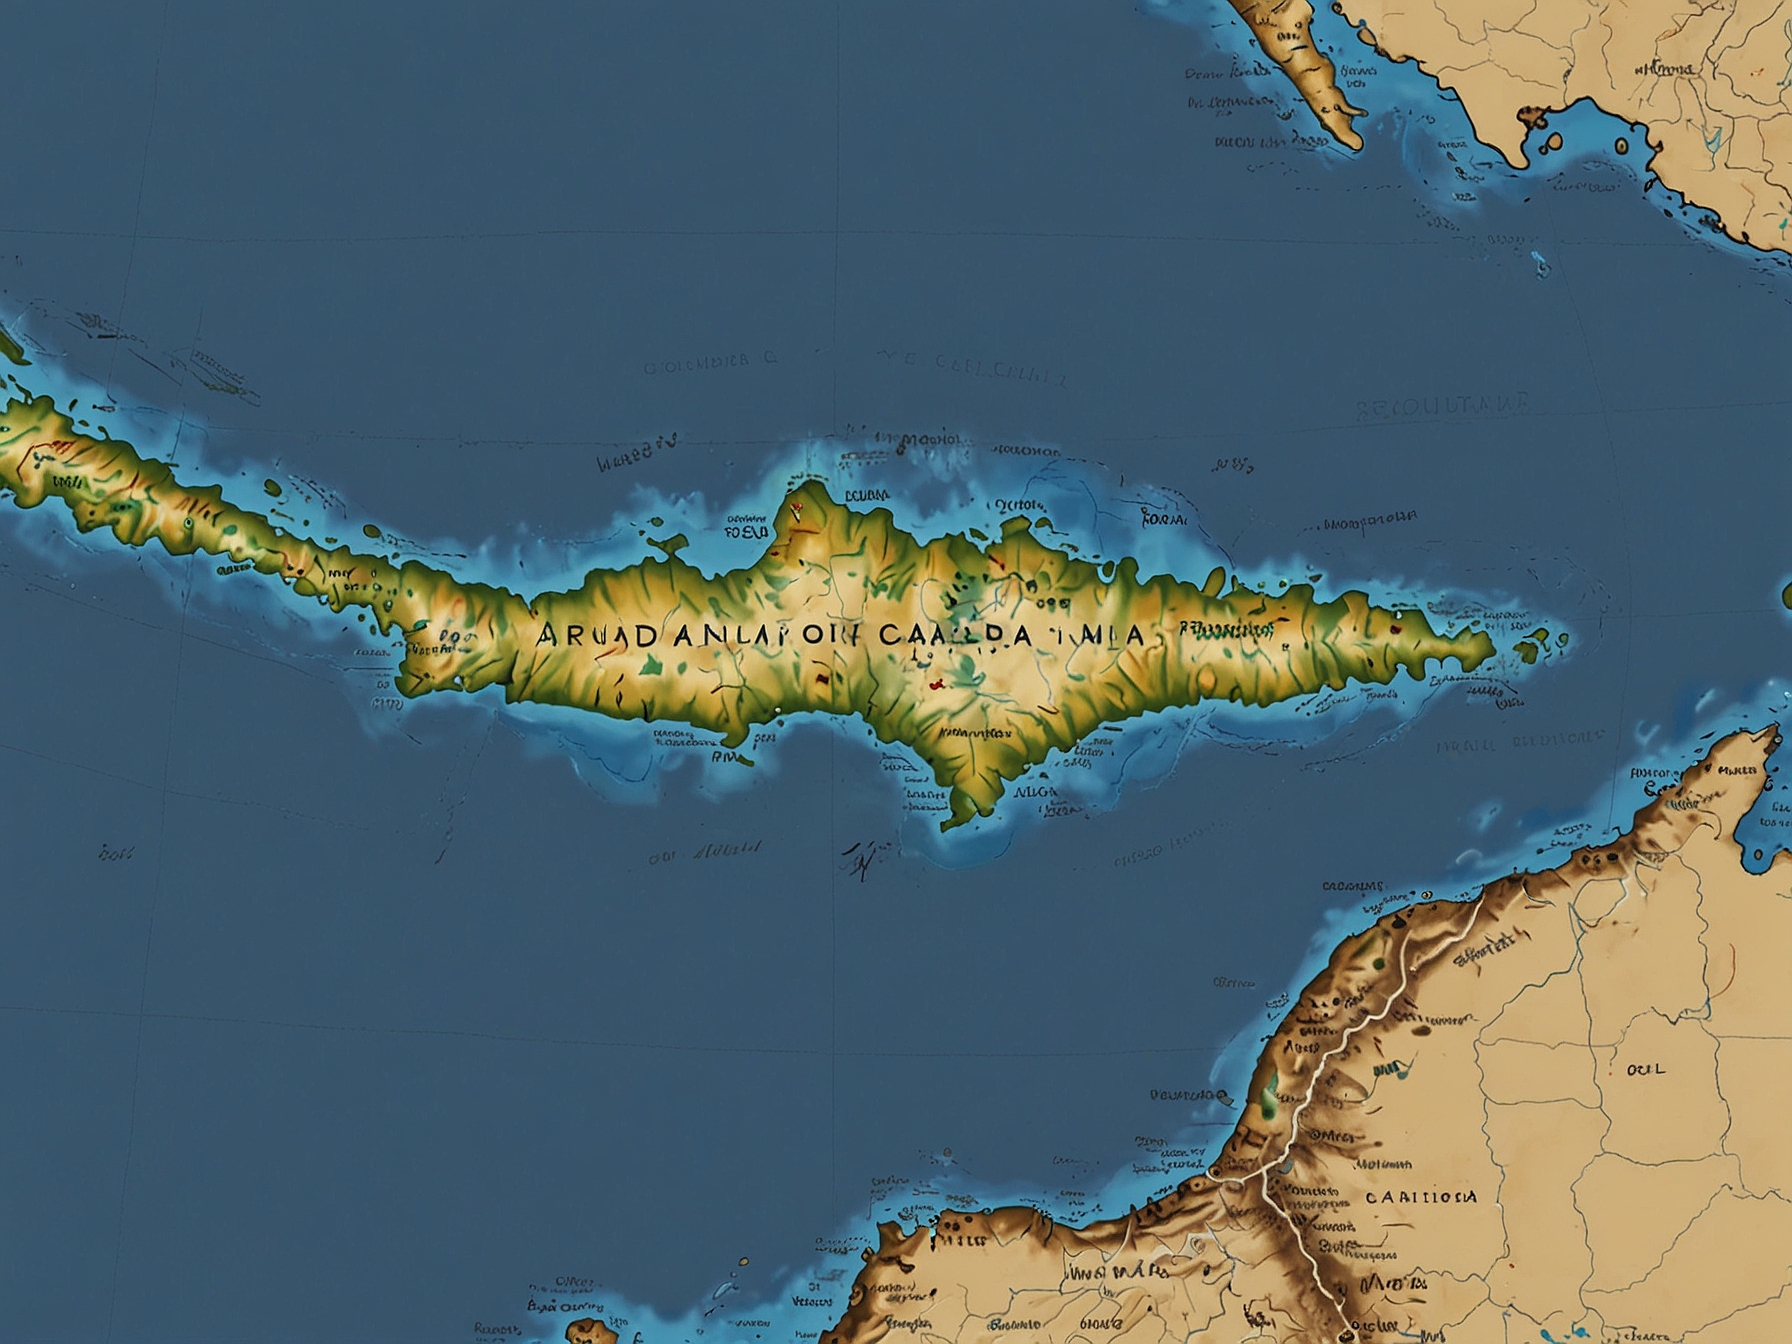 A map of New Caledonia highlighting its geopolitical importance in the Pacific region.